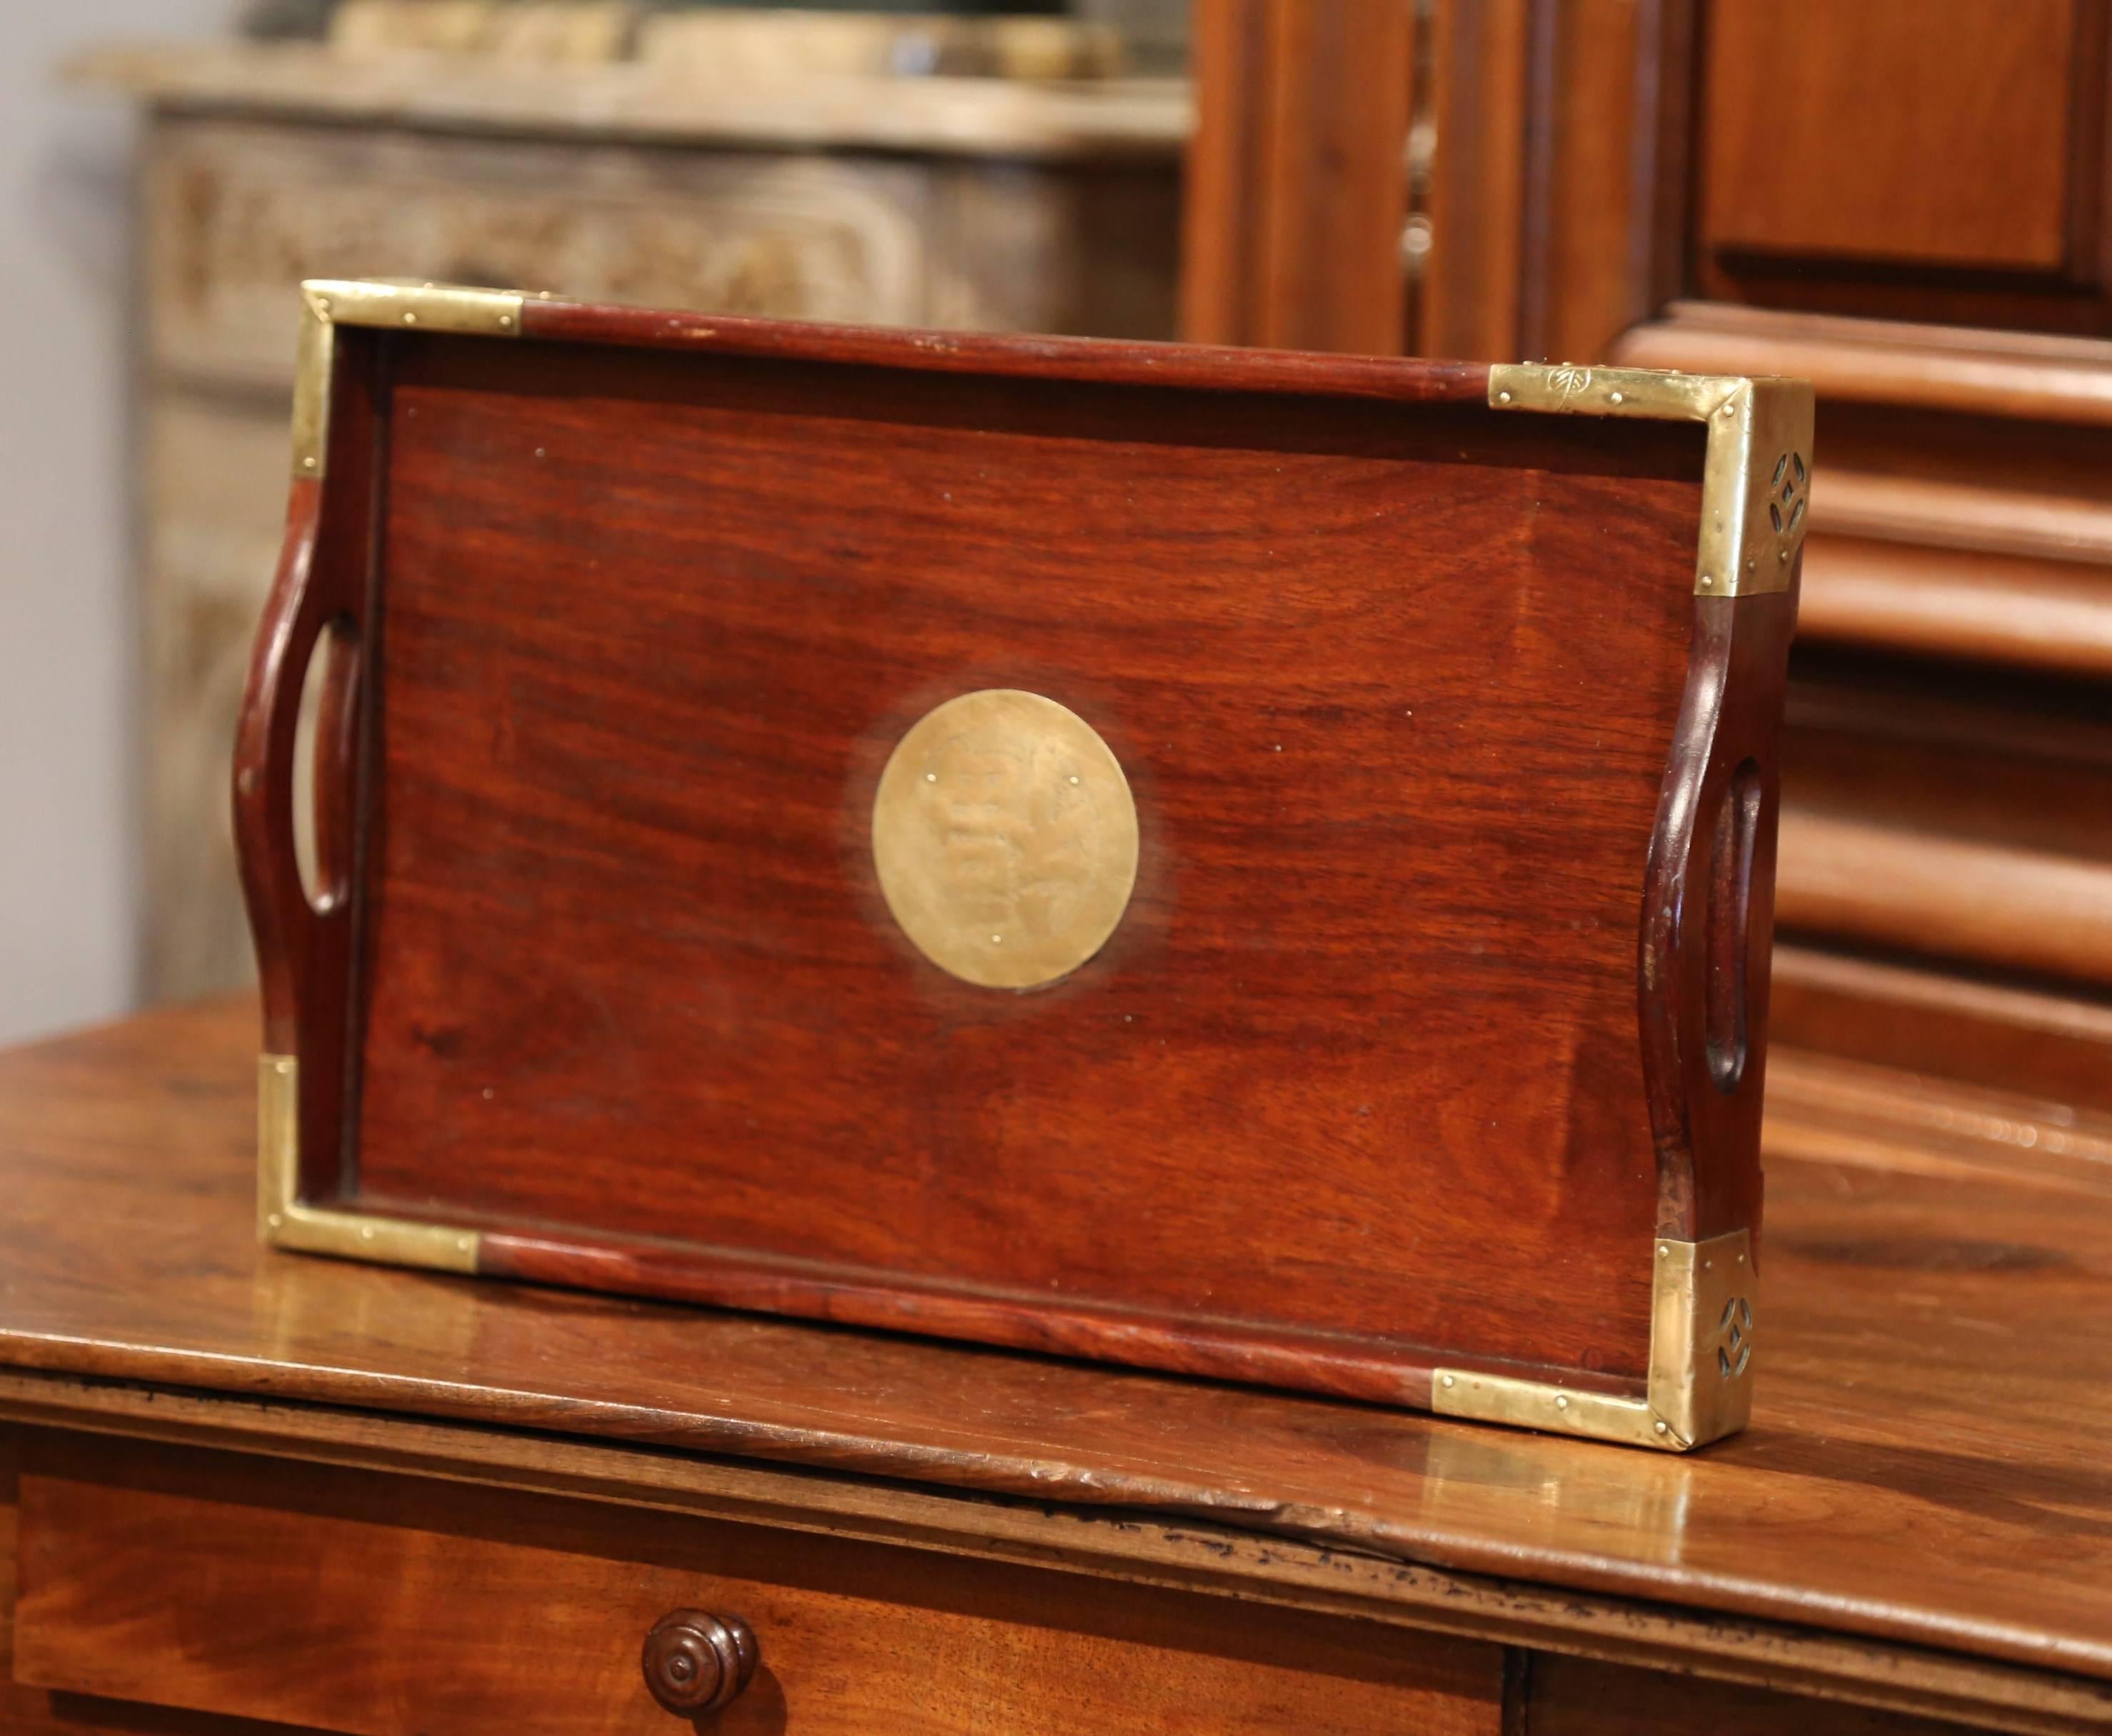 This beautiful rosewood tray with handles was crafted in China, circa 1960. The classic, rectangular tray features brass mounts with engravings in each corner and a round, embellished center medallion with engraved motifs. The tray is in excellent